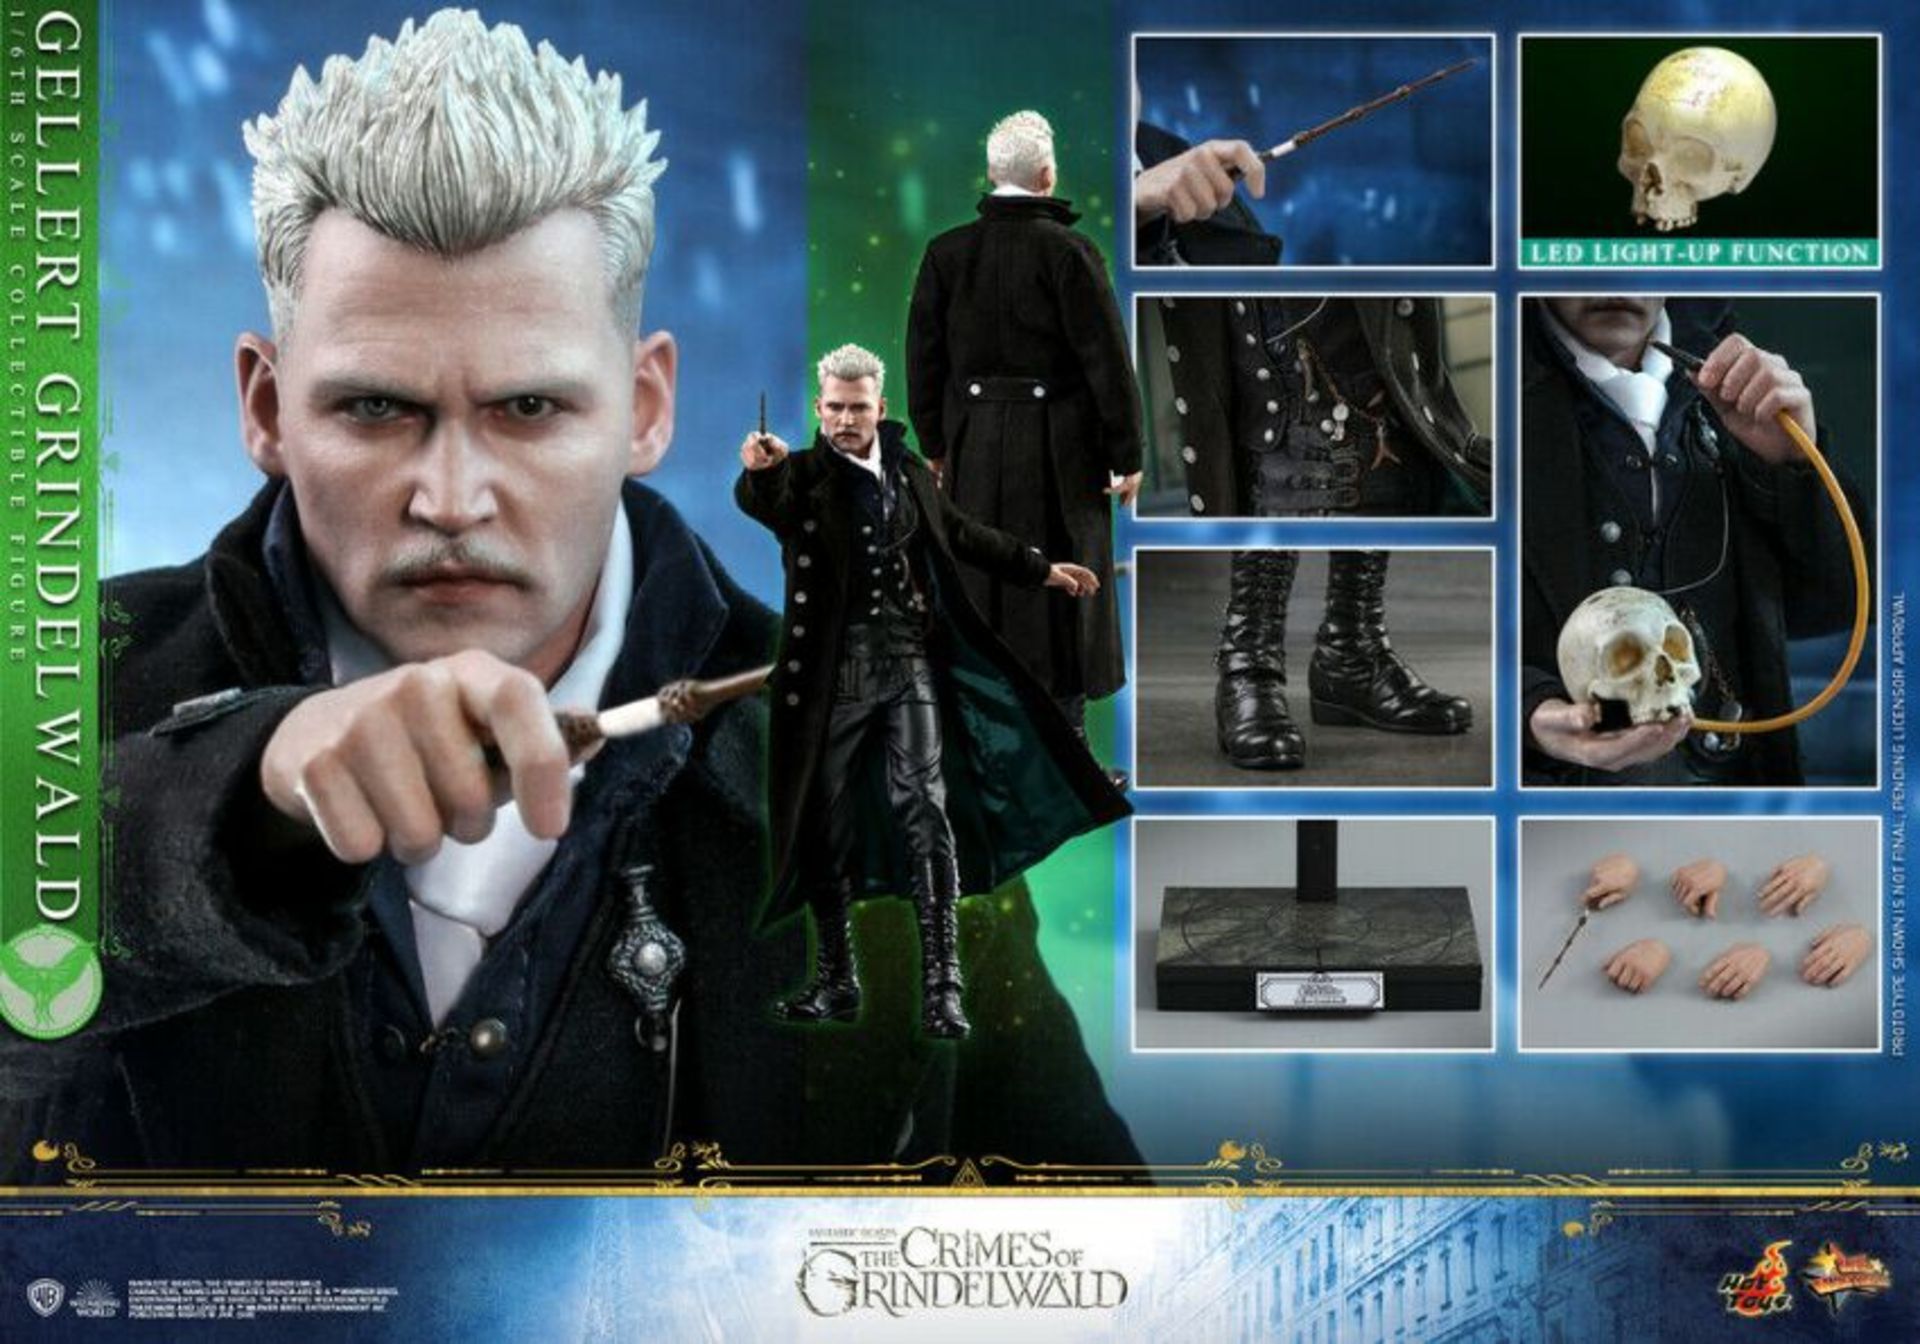 1 x Hot Toys Fantastic Beasts Gellert Grindelwald Special Edition 1/6 Scale Figurine - MMS513 - - Image 2 of 4